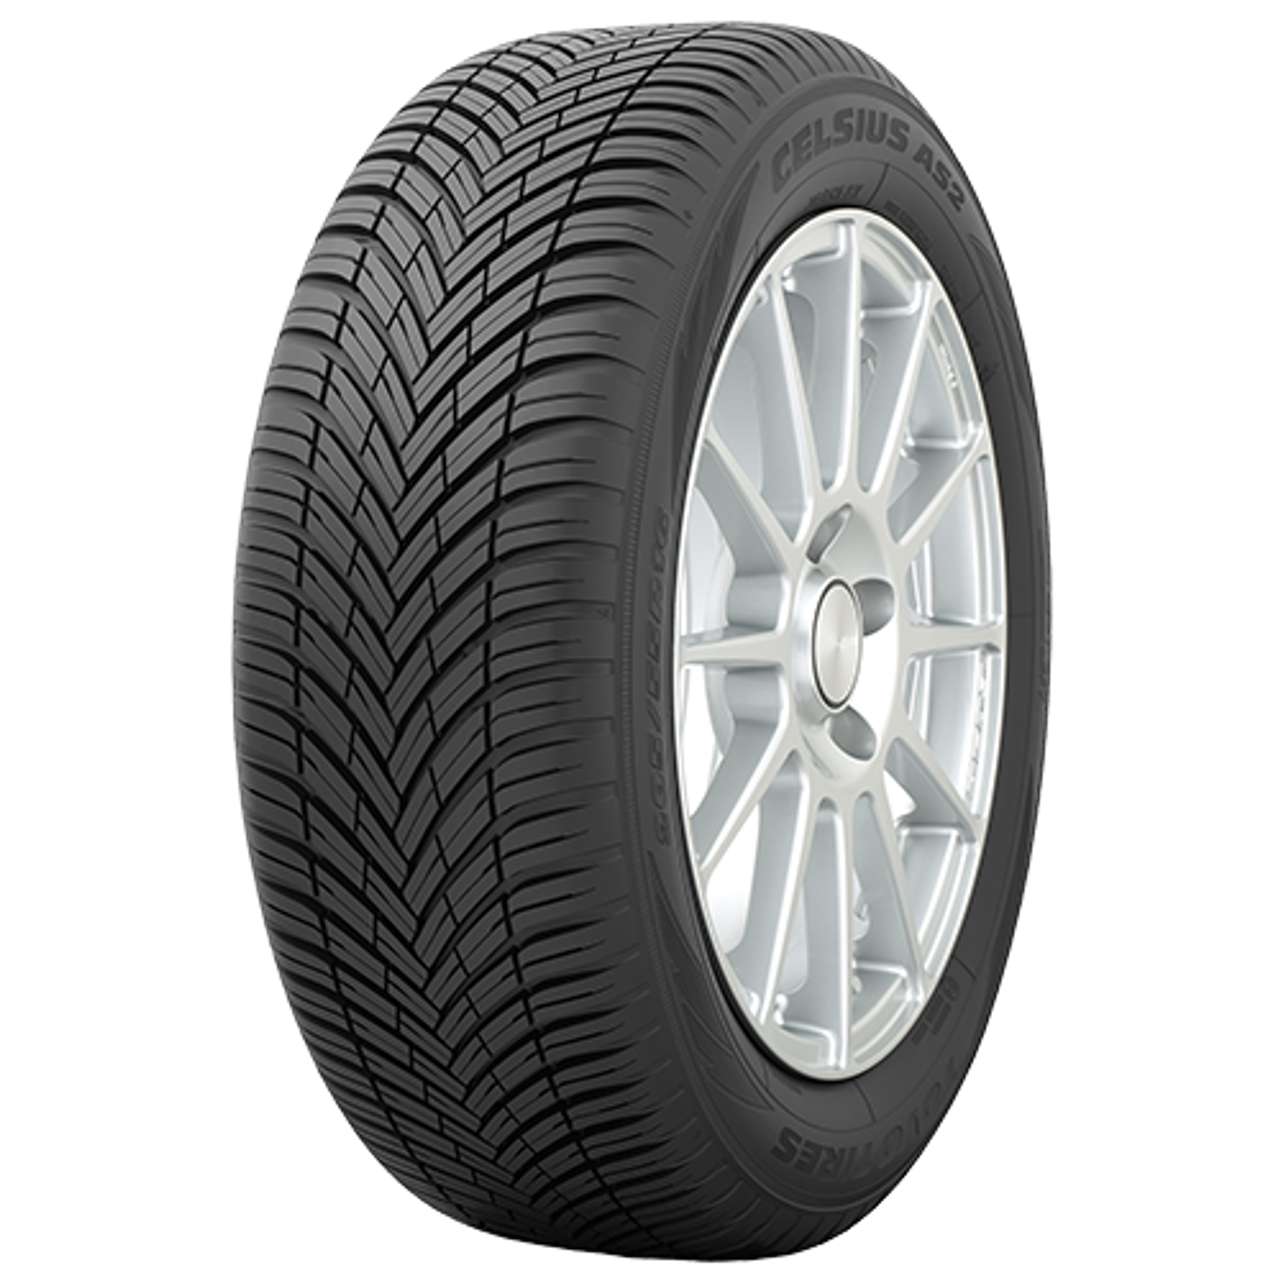 TOYO CELSIUS AS2 195/60R16 93V BSW